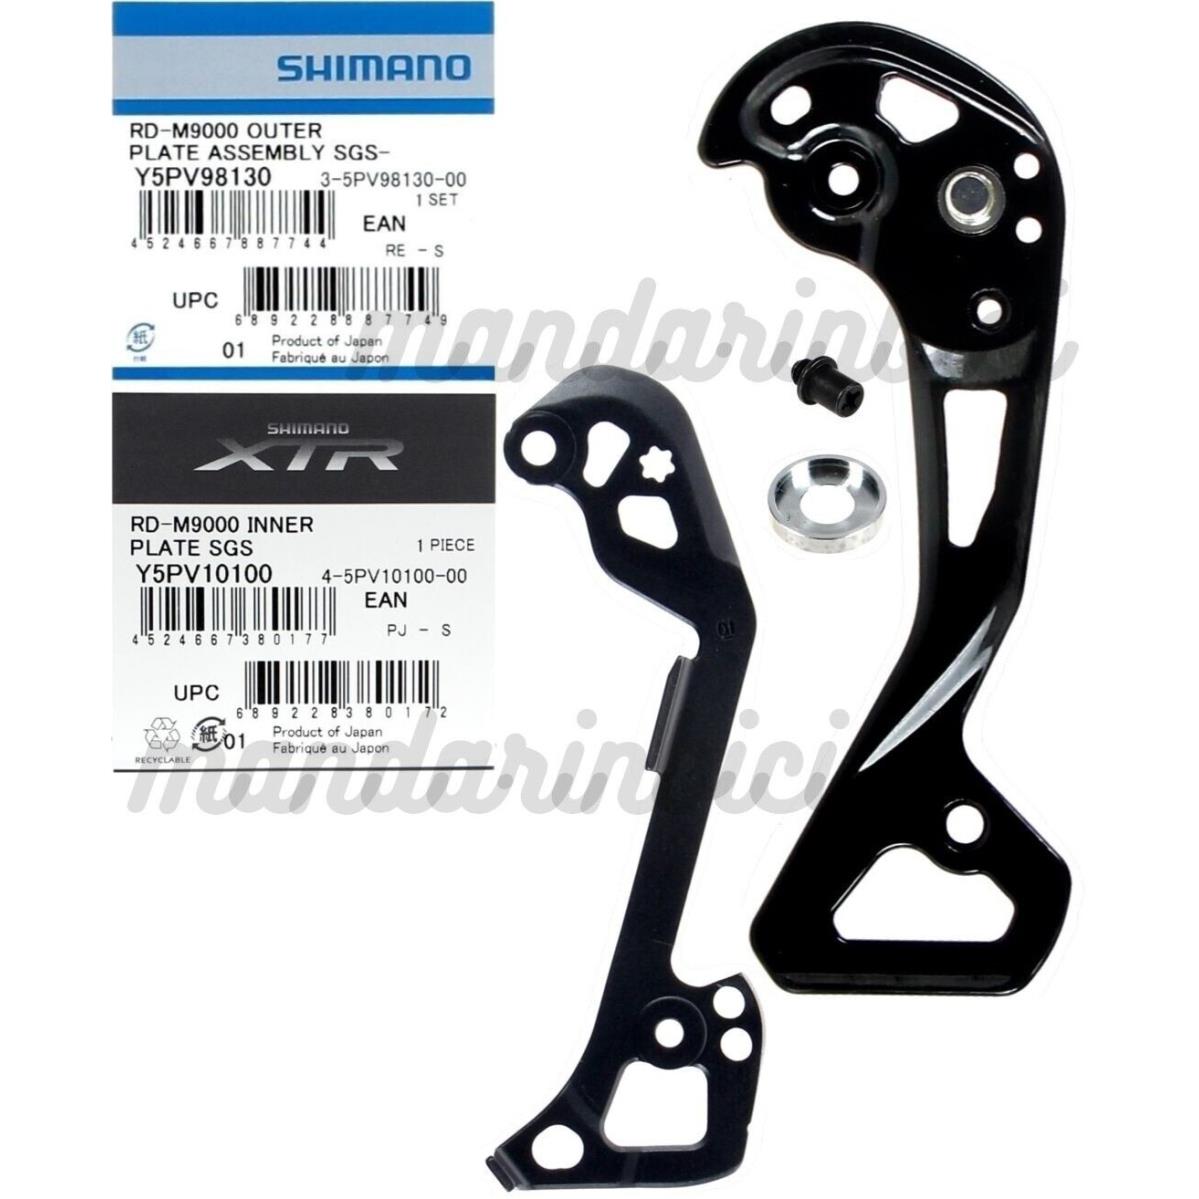 Shimano Xtr RD-M9000 Outer/inner Plate Assembly Sgs Type